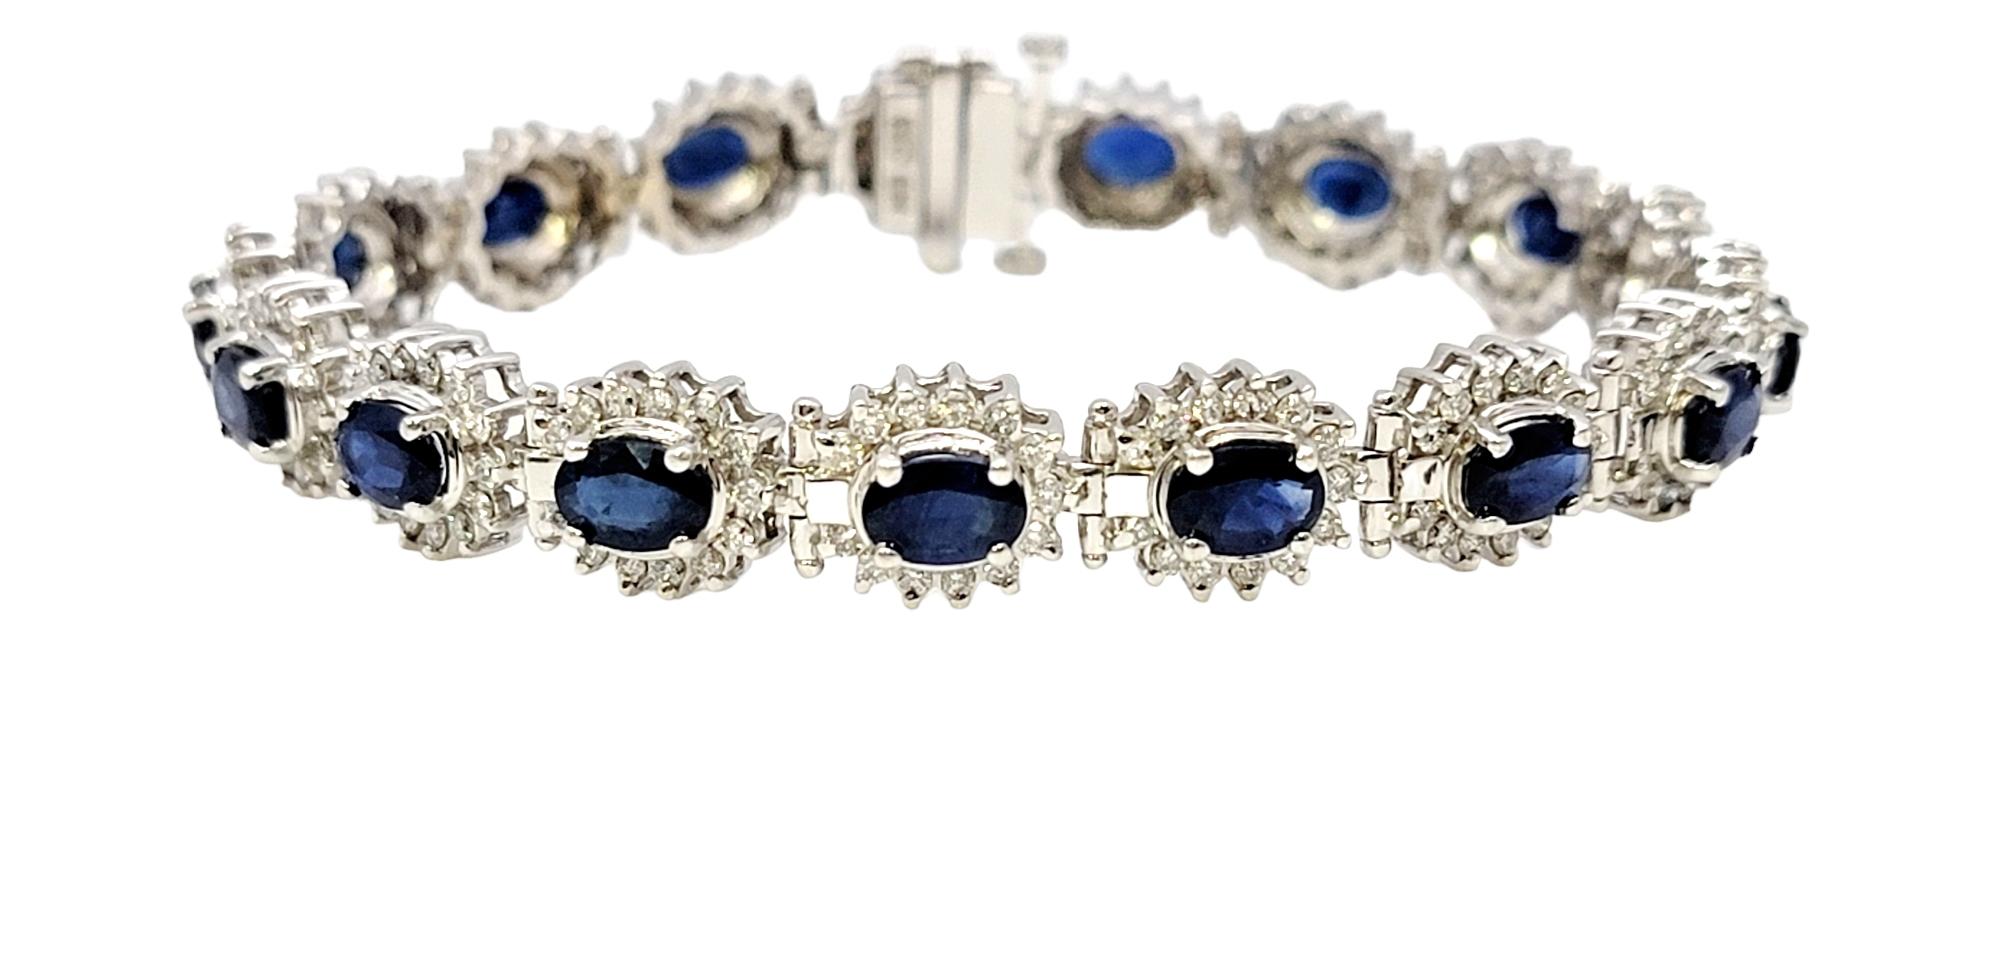 Length: 7.25 Inches

Incredibly gorgeous line bracelet with a rich, elegant pop of color. This amazing piece absolutely dazzles with its bright blue sapphires and icy white diamonds. The striking bracelet sits elegantly on the wrist, sparkling from